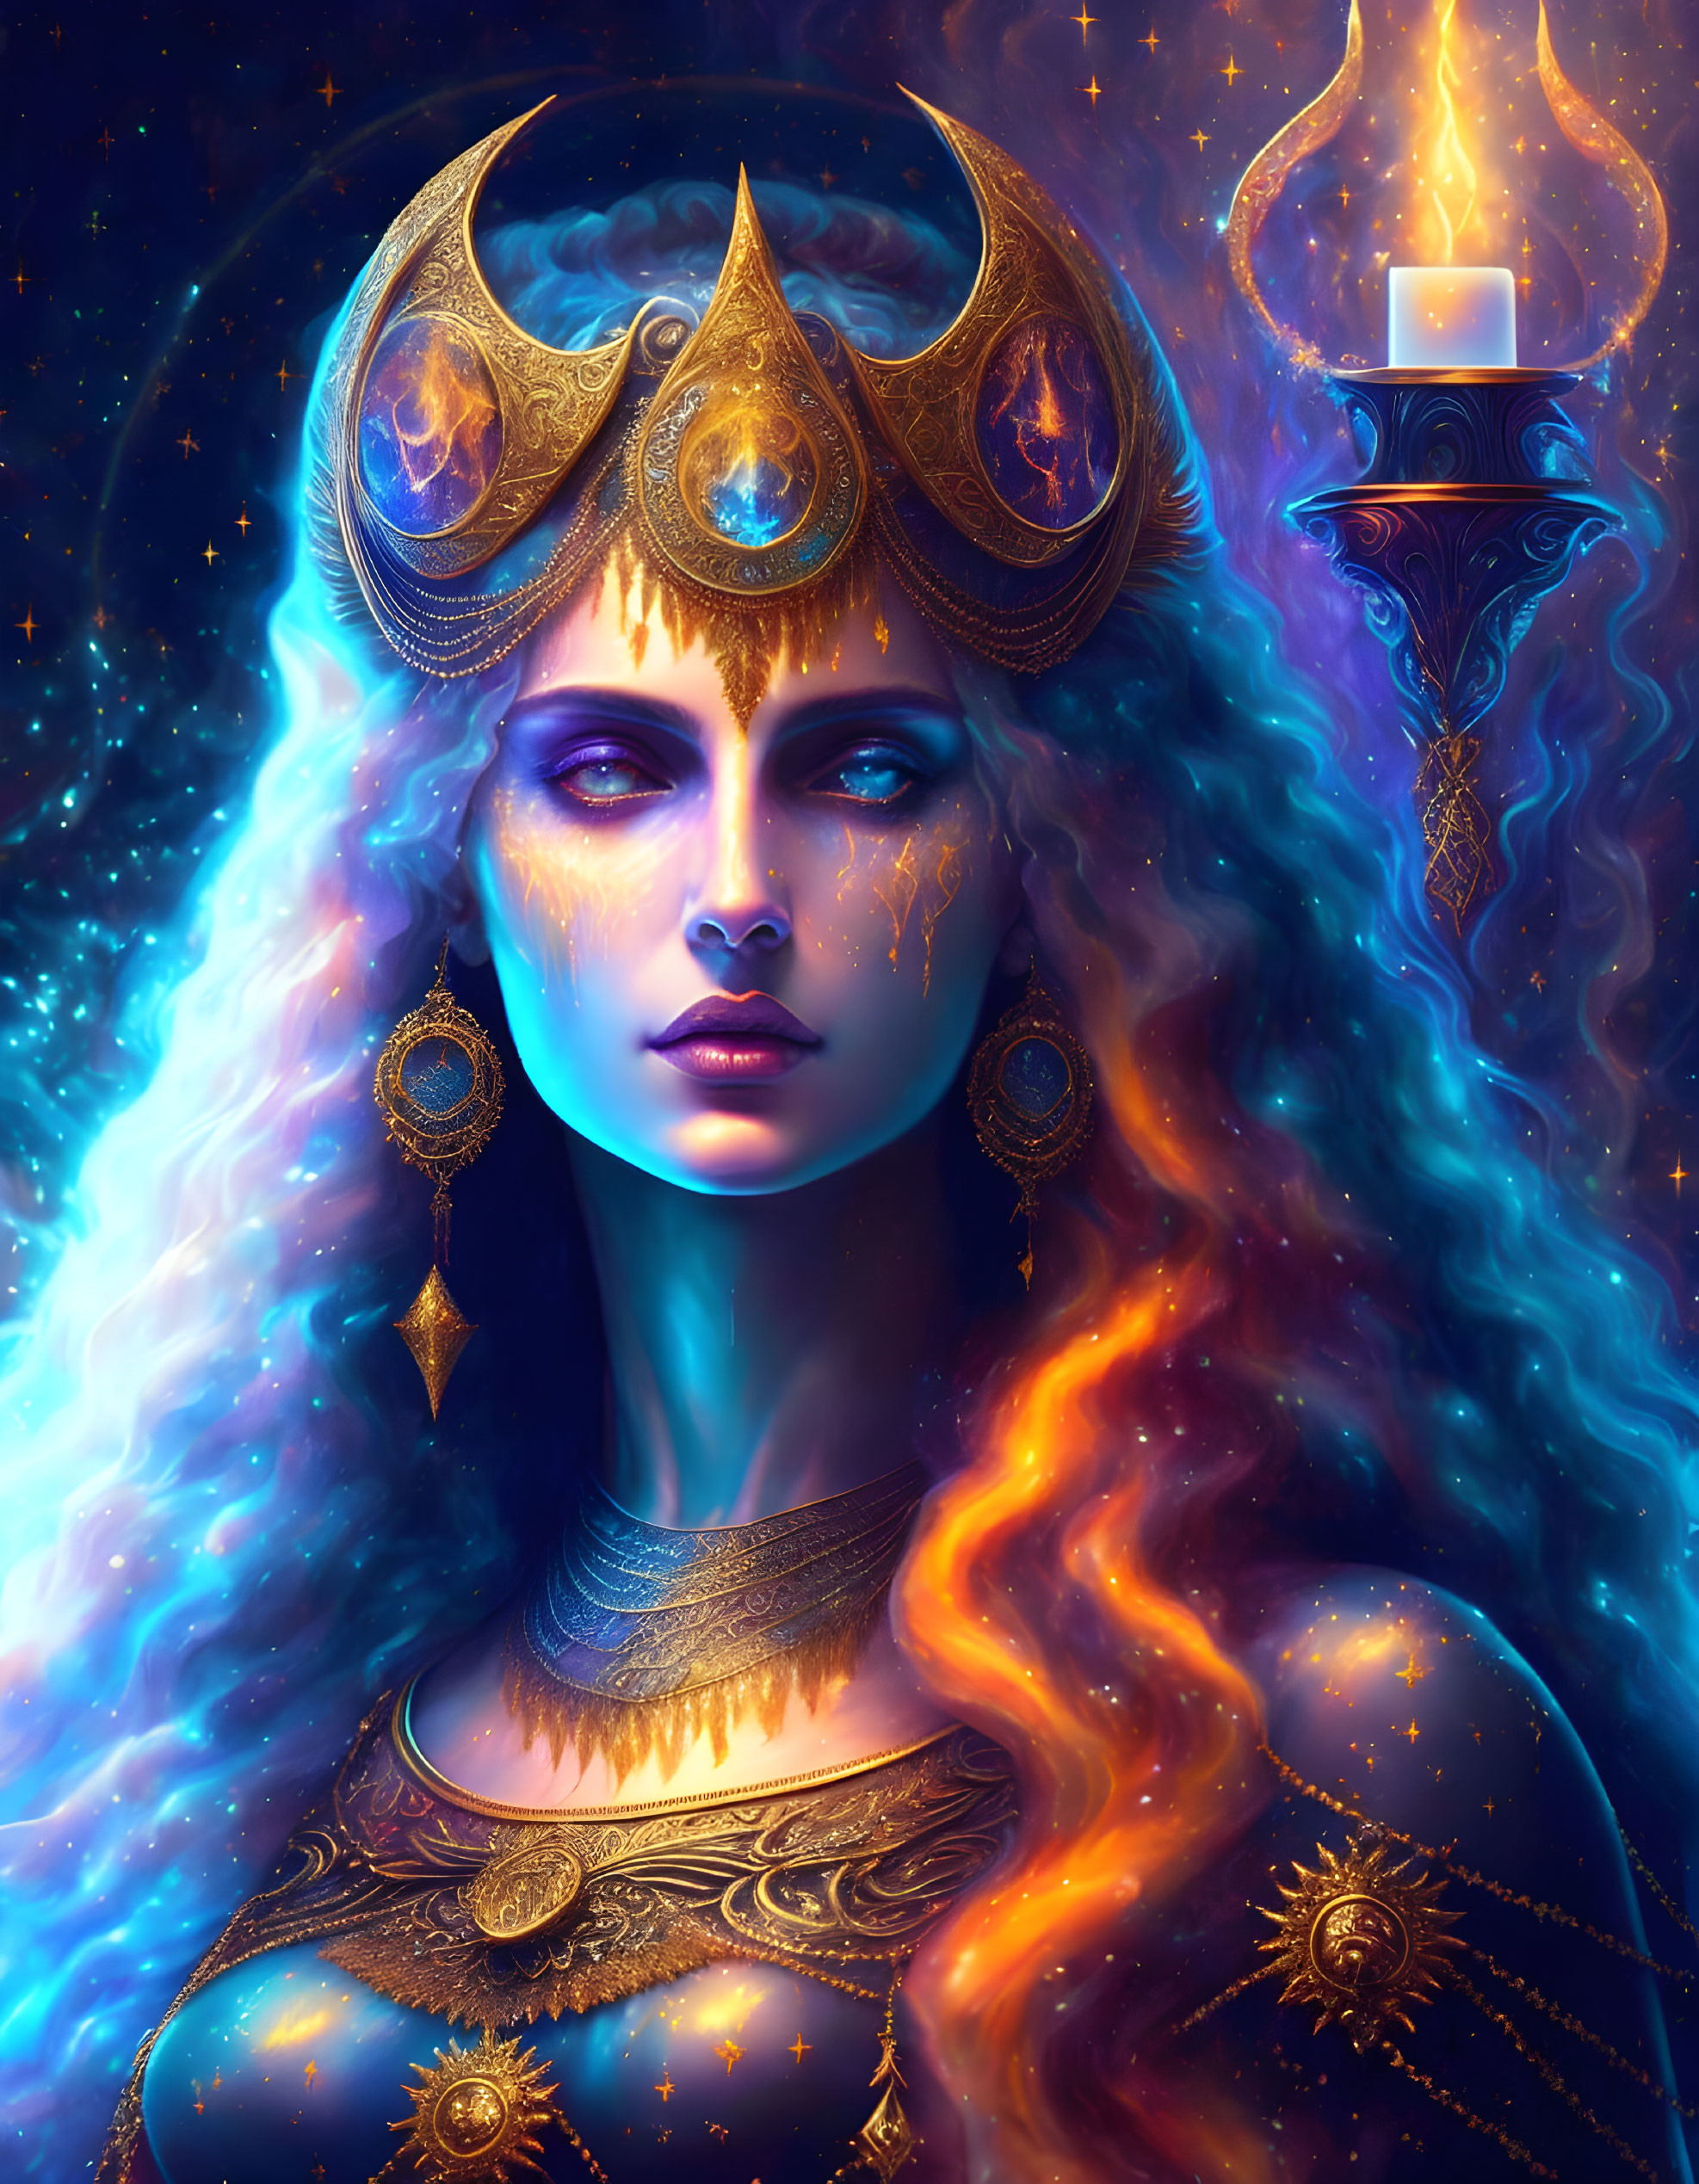 Blue-skinned woman with moon headpiece holds candle in cosmic setting